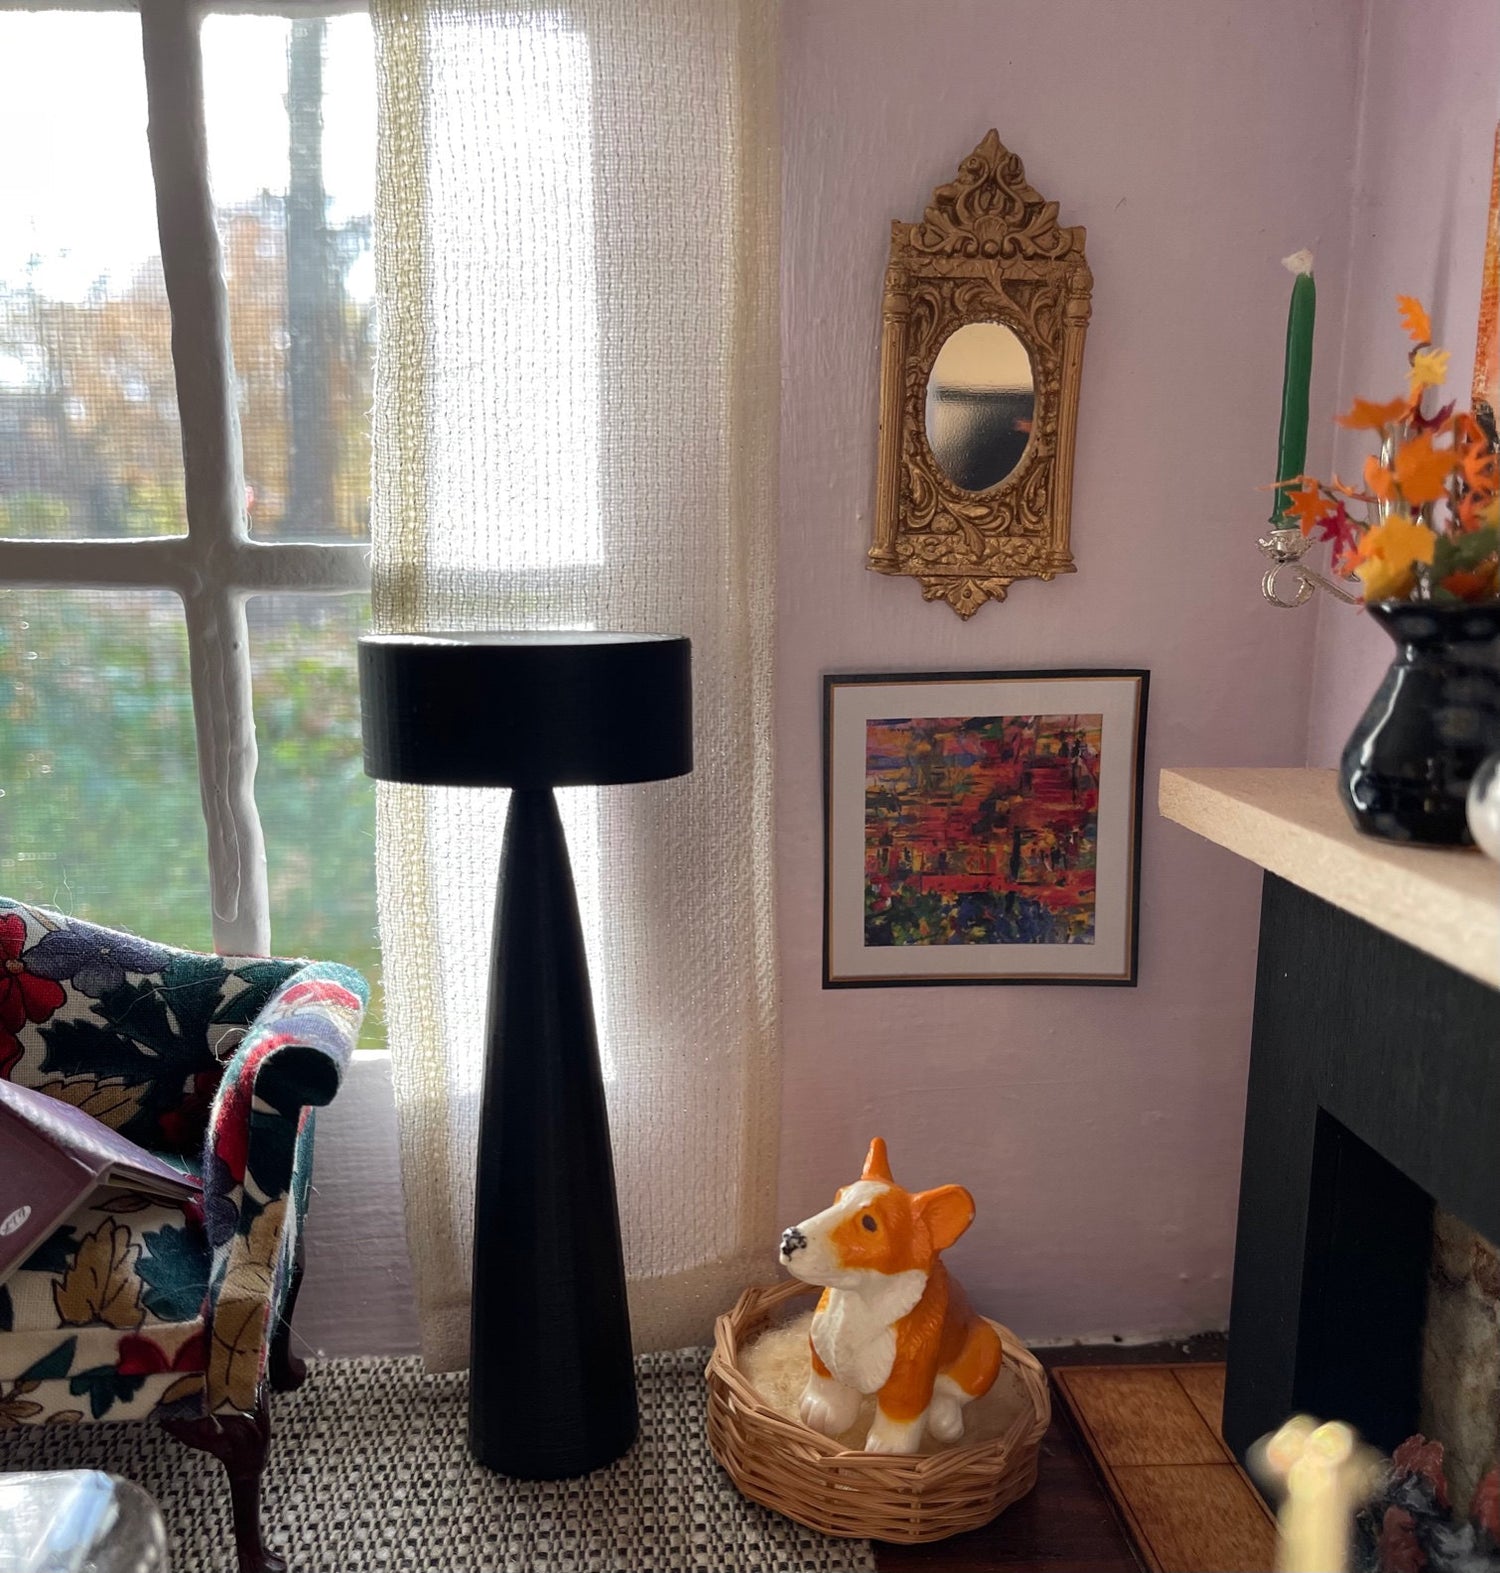 A miniature living room featuring an ornate gold mirror, a window with curtains, a lamp, and a small plastic dog in a wicker bed